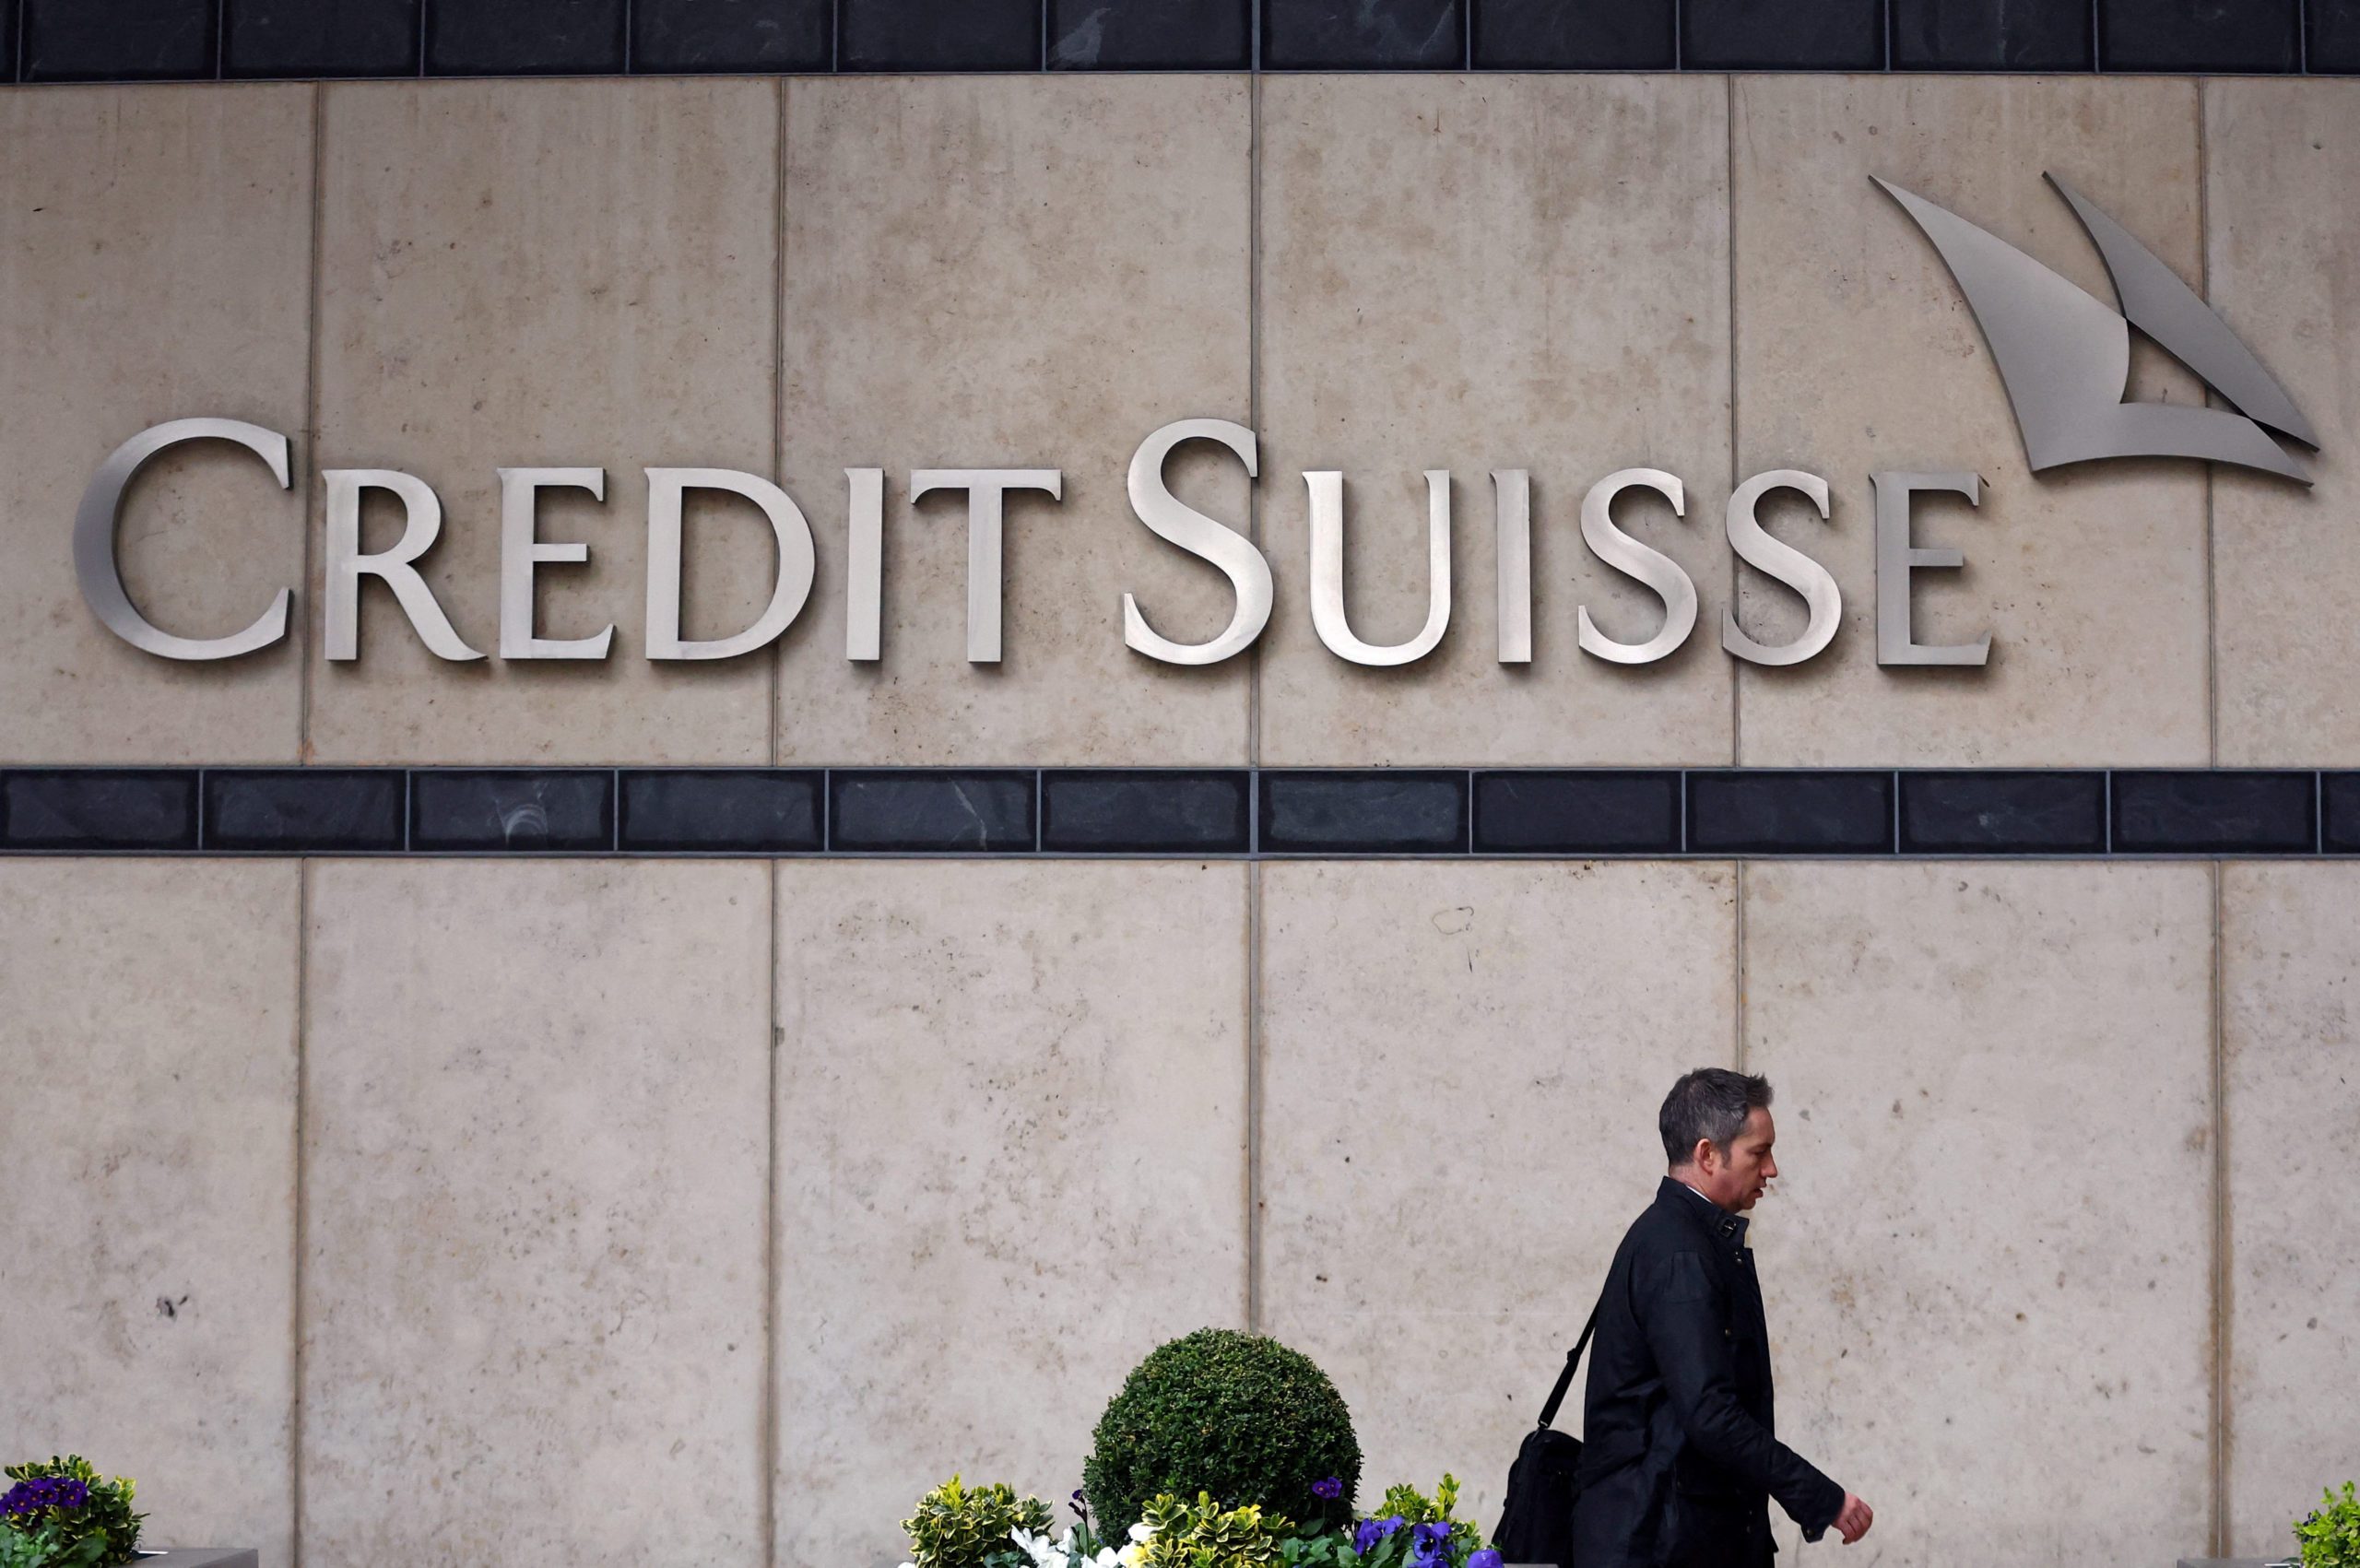 Credit Suisse hires SE Asia vice chairman for wealth management based in SG